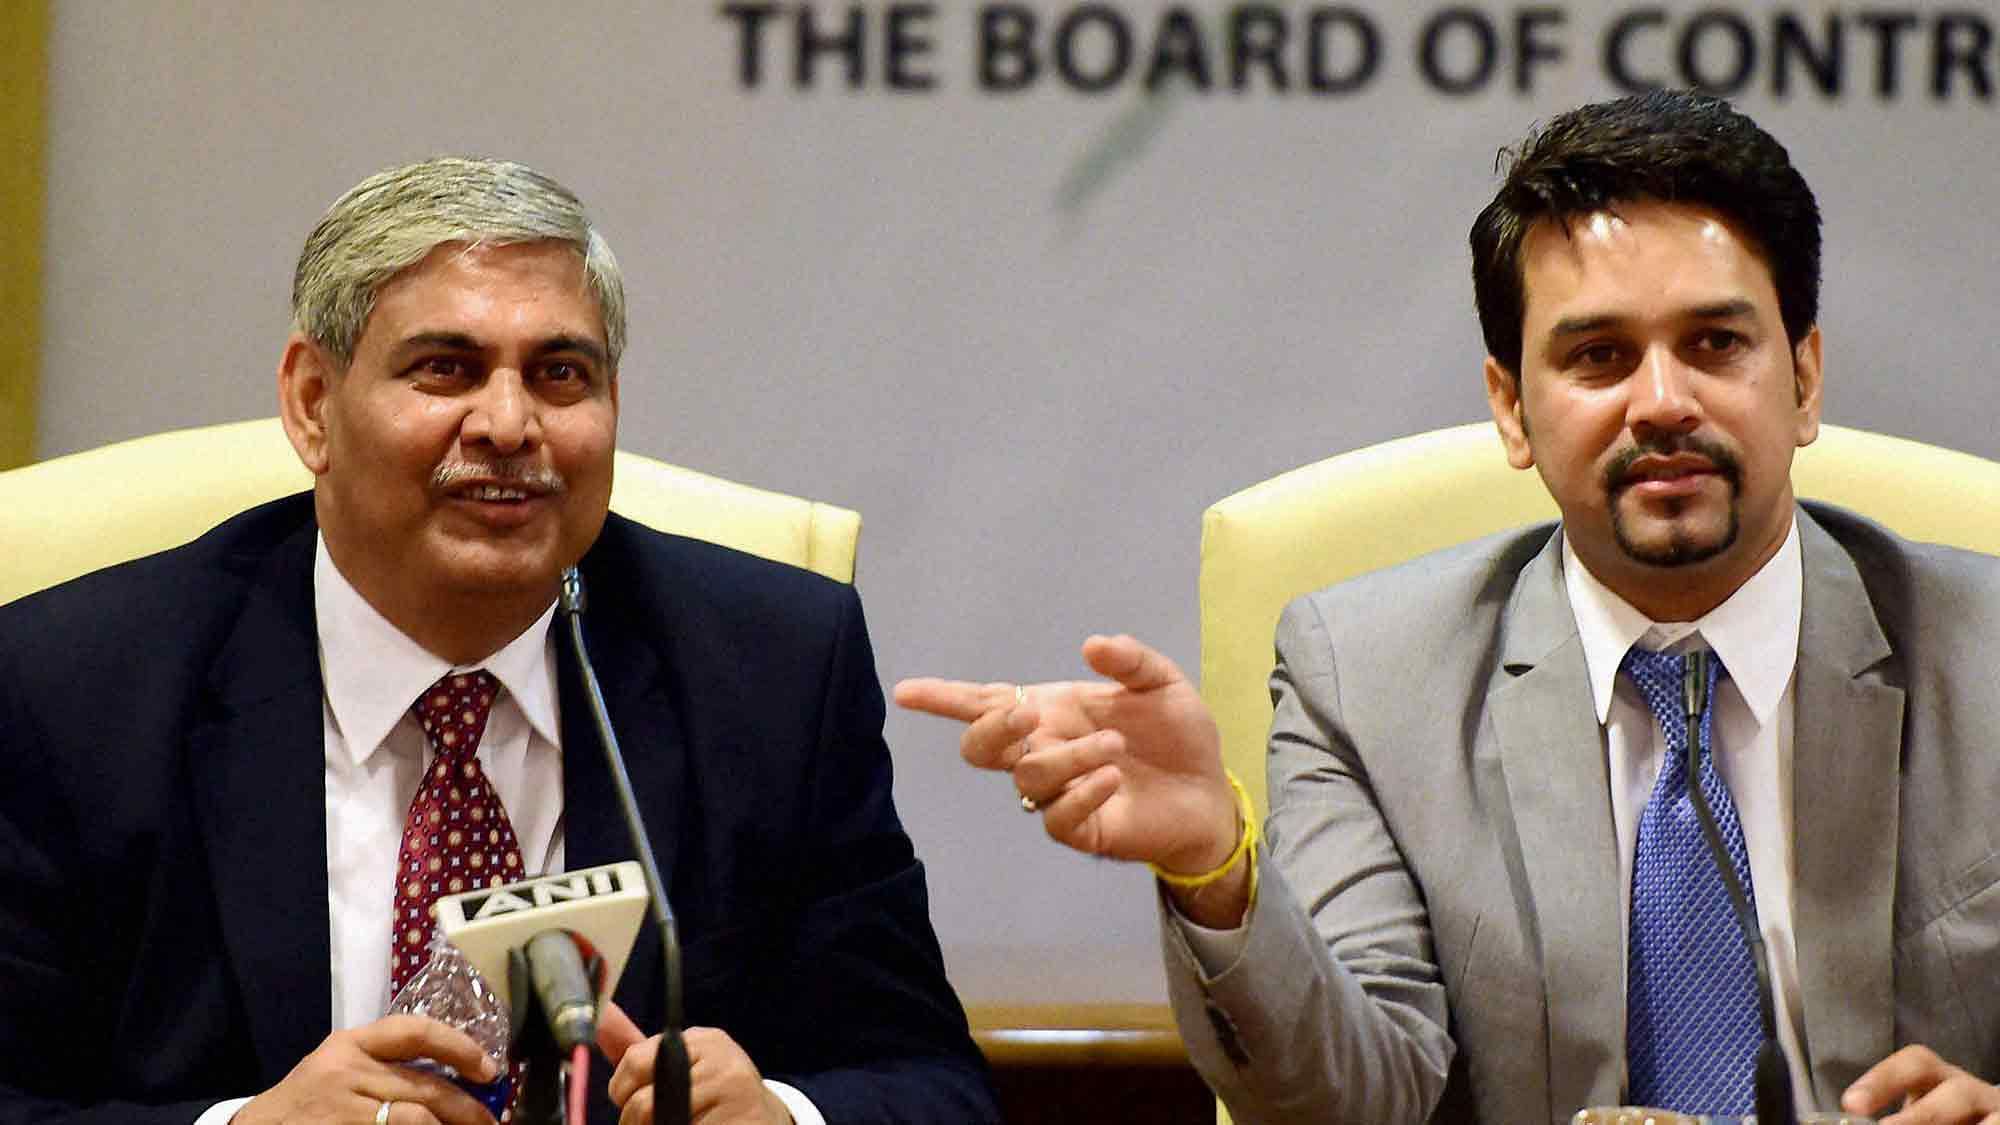 BCCI President Shashank Manohar and Secretary Anurag Thakur could both see their powers diminished if the recommendations of the Lodha Committee are implemented by the BCCI. (Photo: PTI)